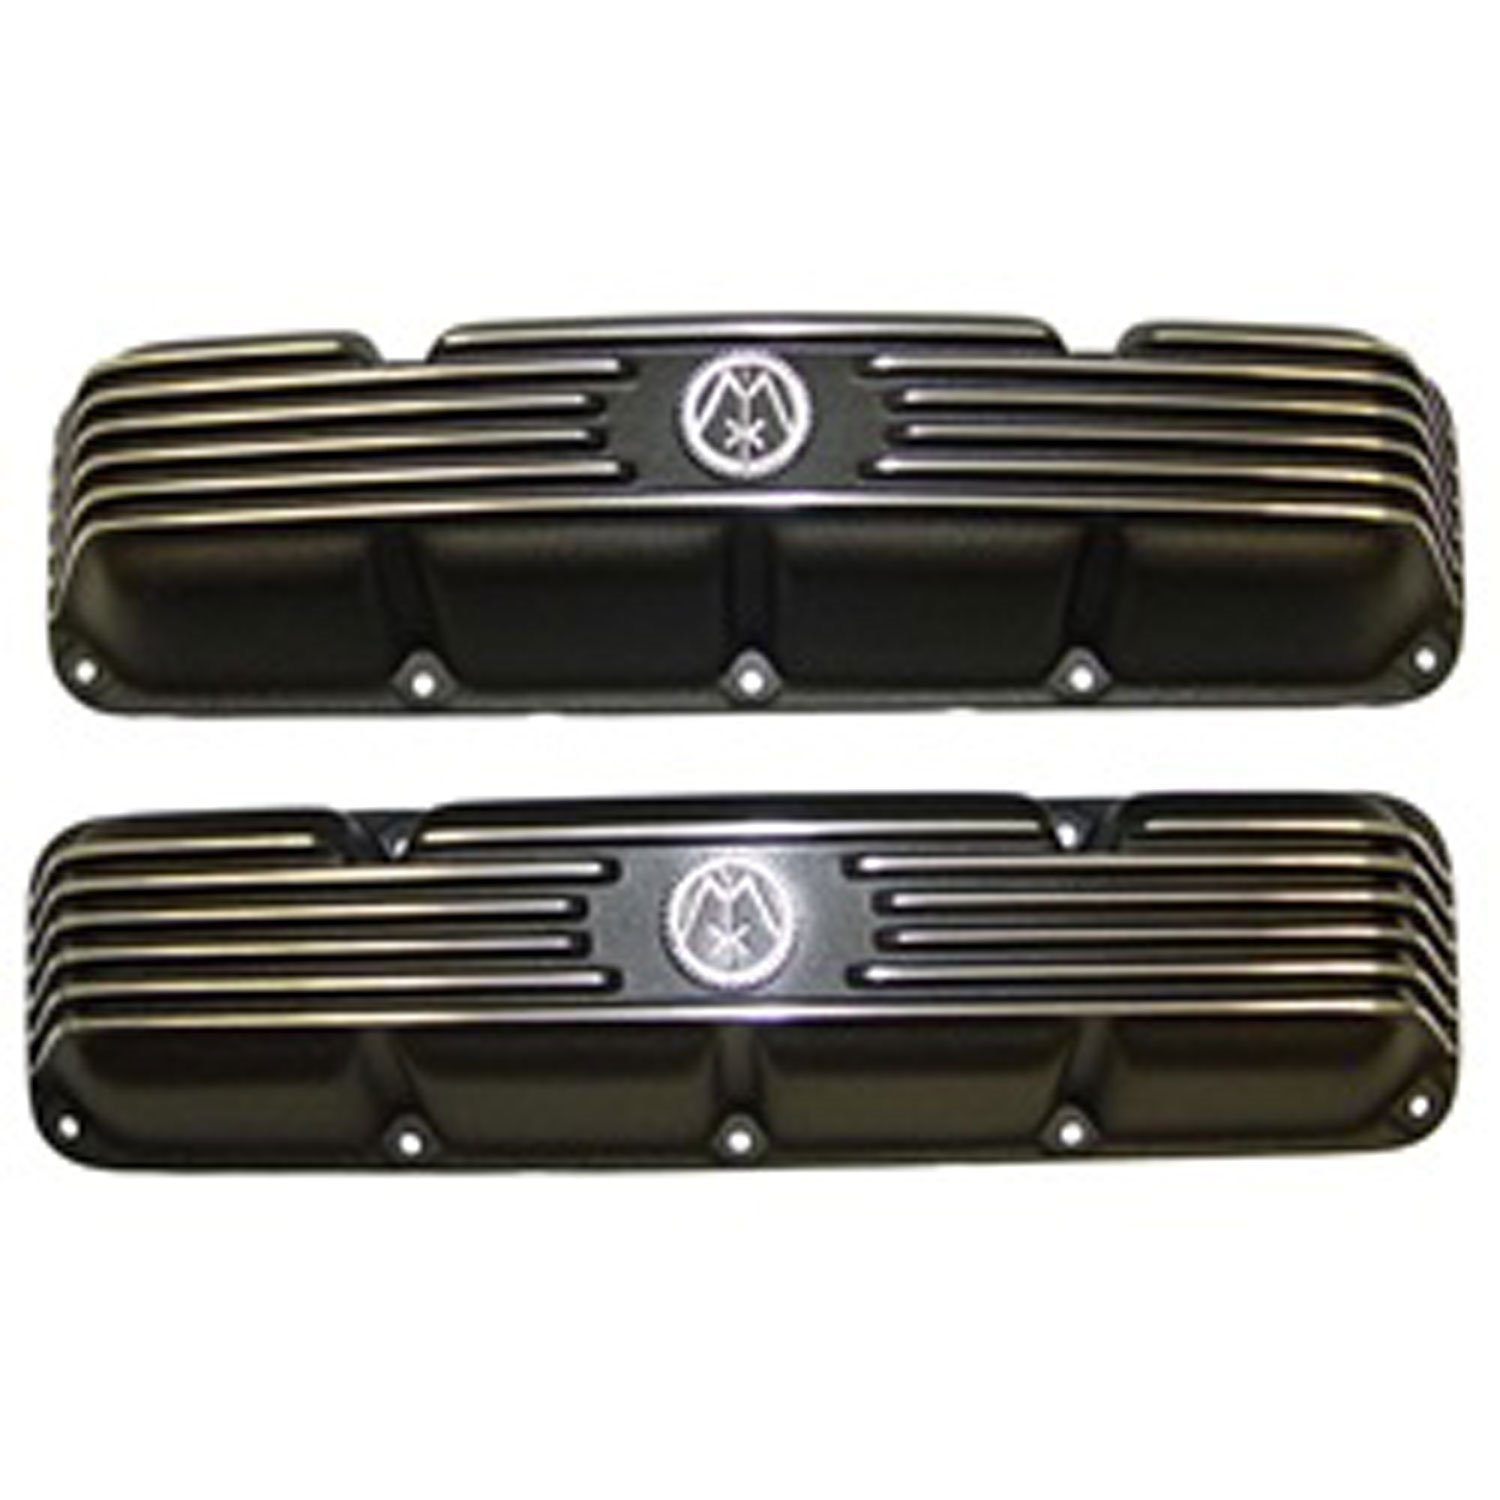 Finned Aluminum Valve Covers for Select 1966-1991 Car and Jeep Models with 290, 304, 343, 360, 390 or 401 Engine